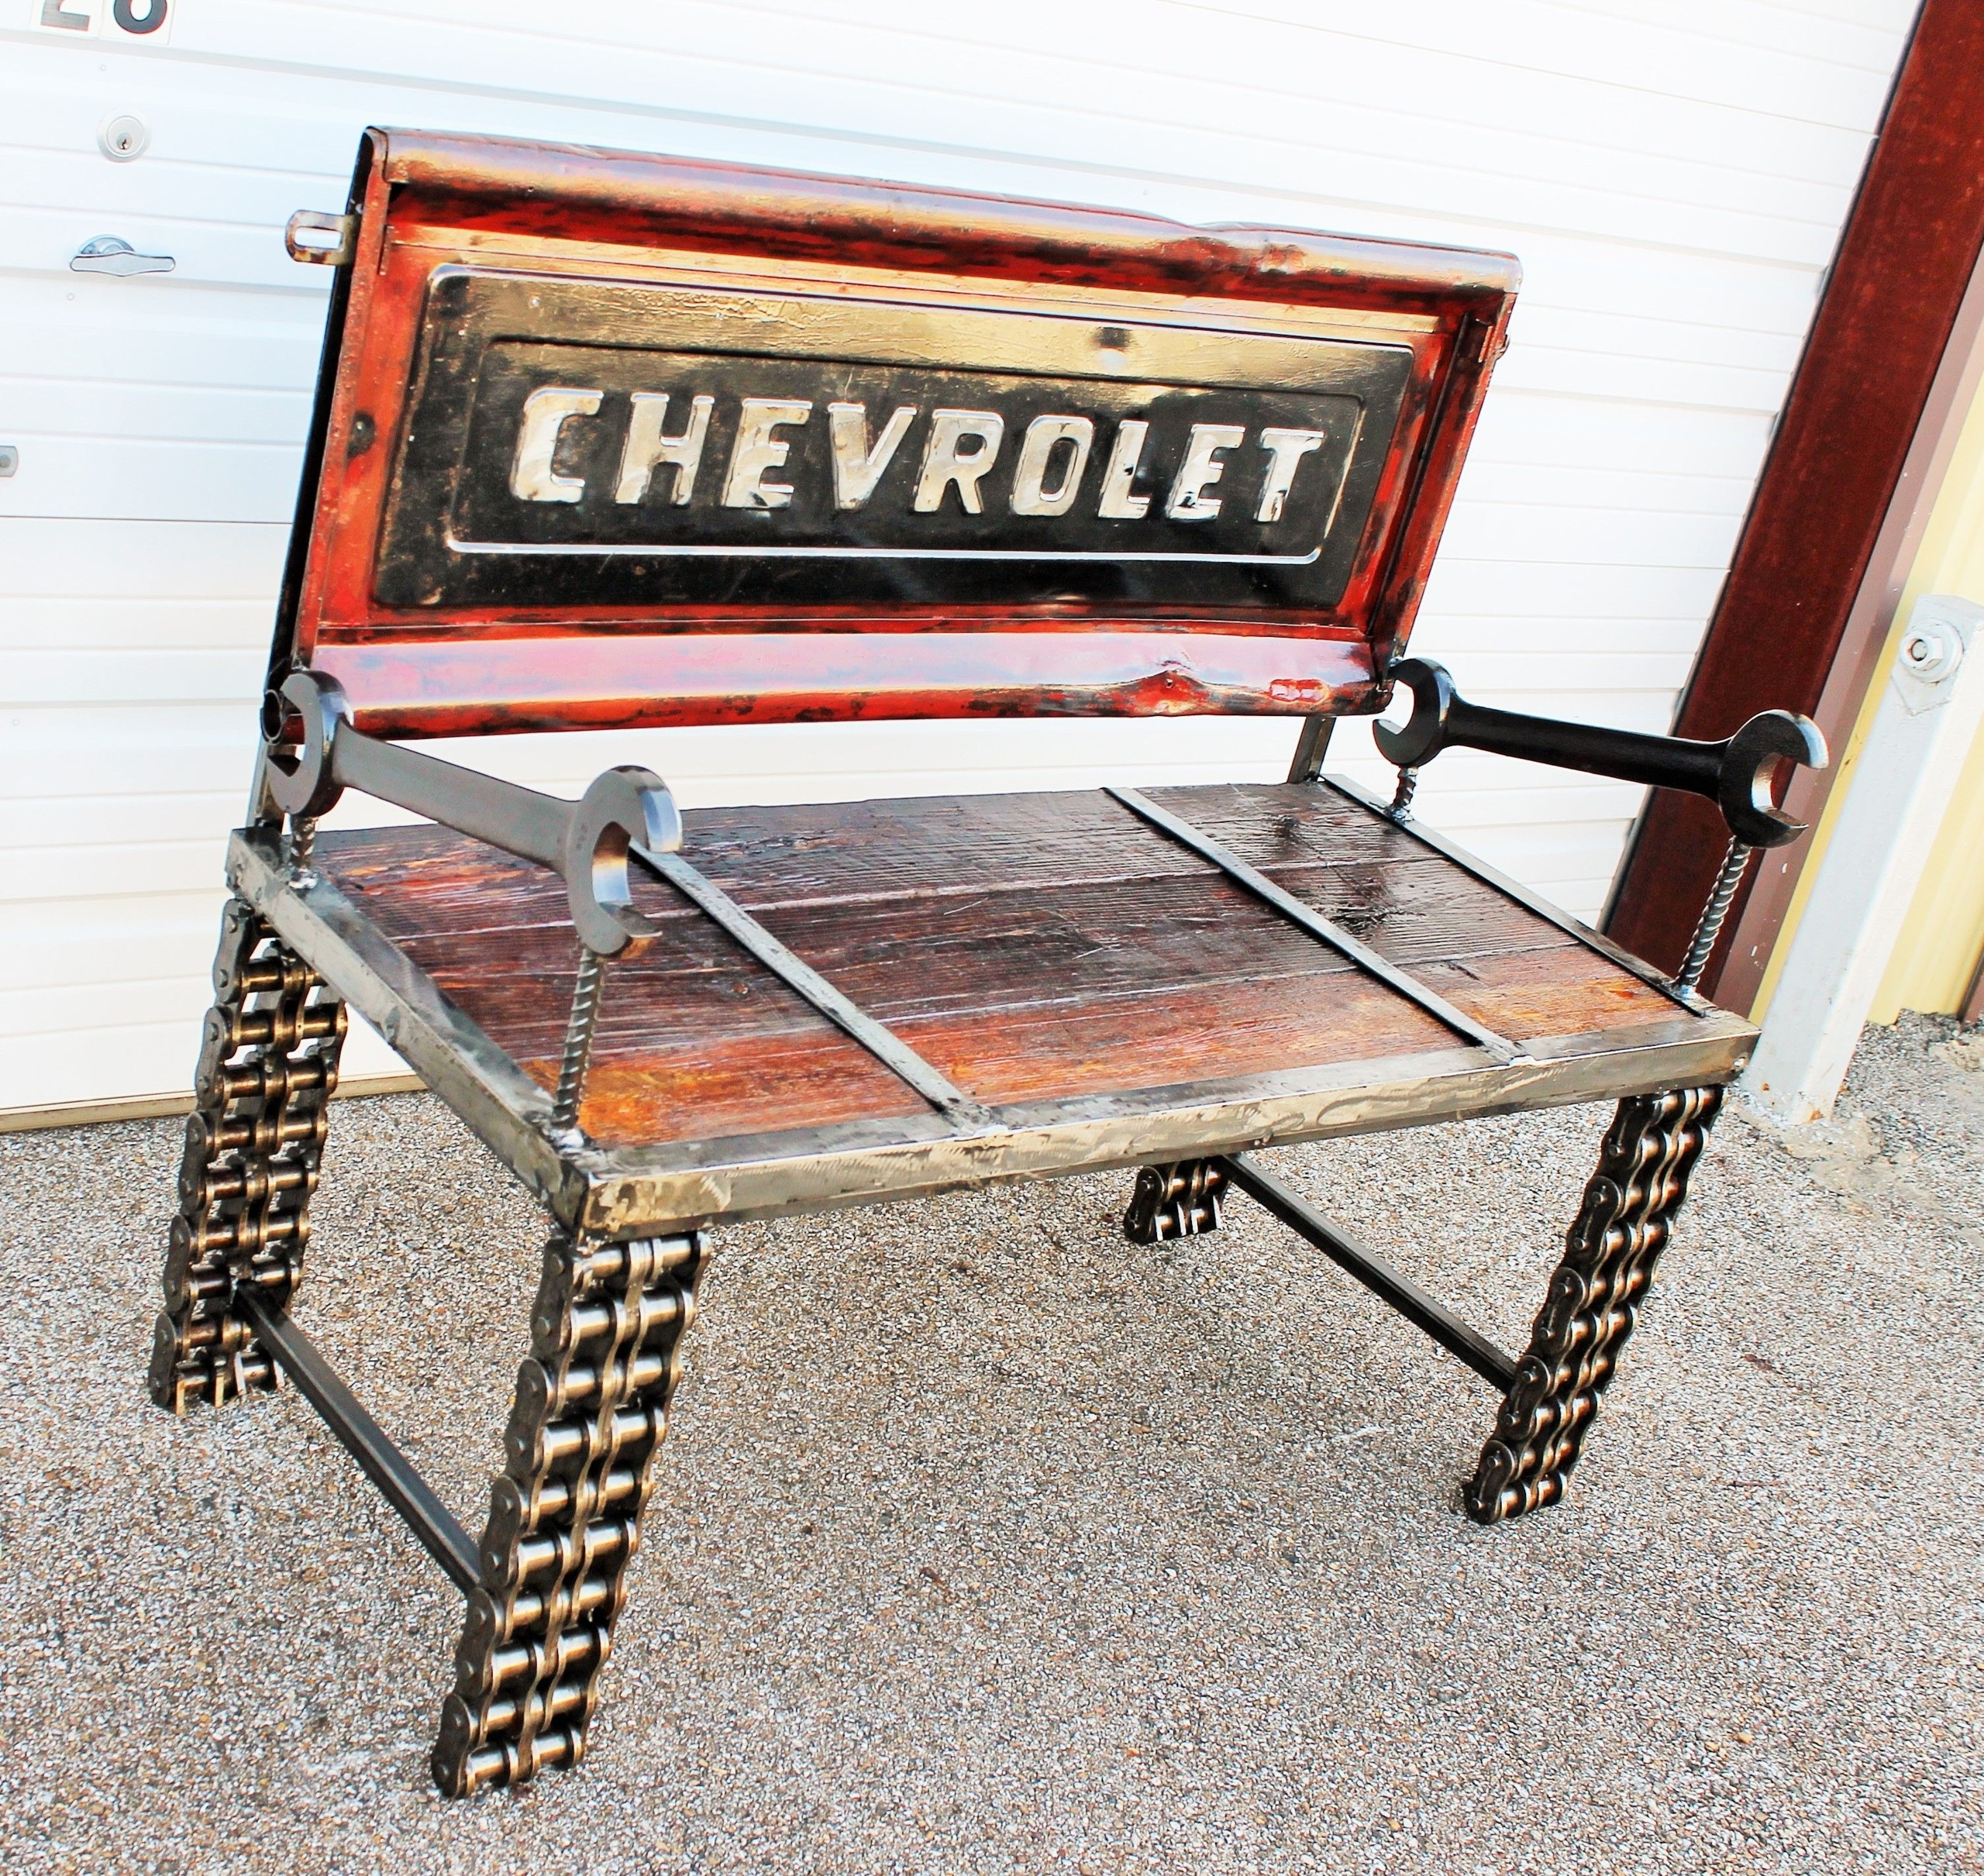 Chevy truck tailgate bench made with